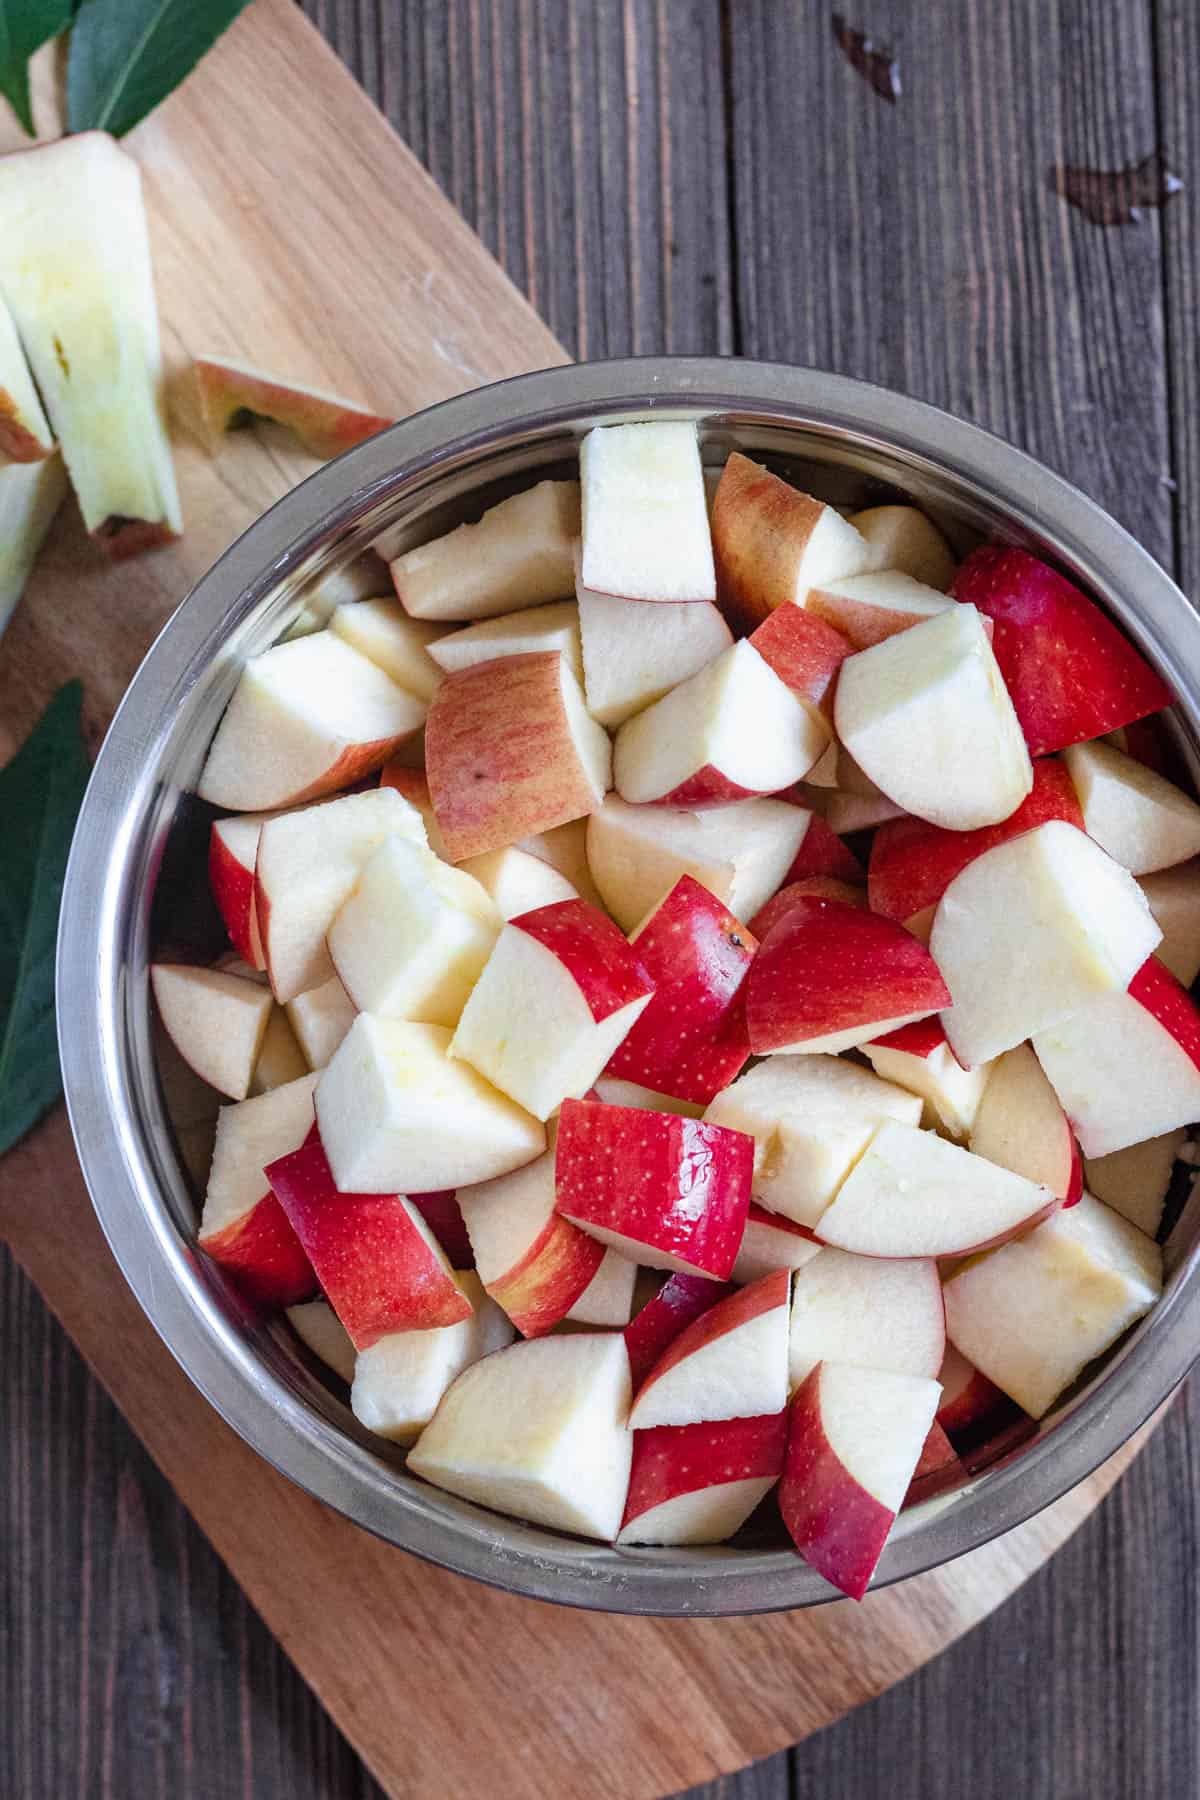 cubed apples in a medium sized bowl with a darker colored background